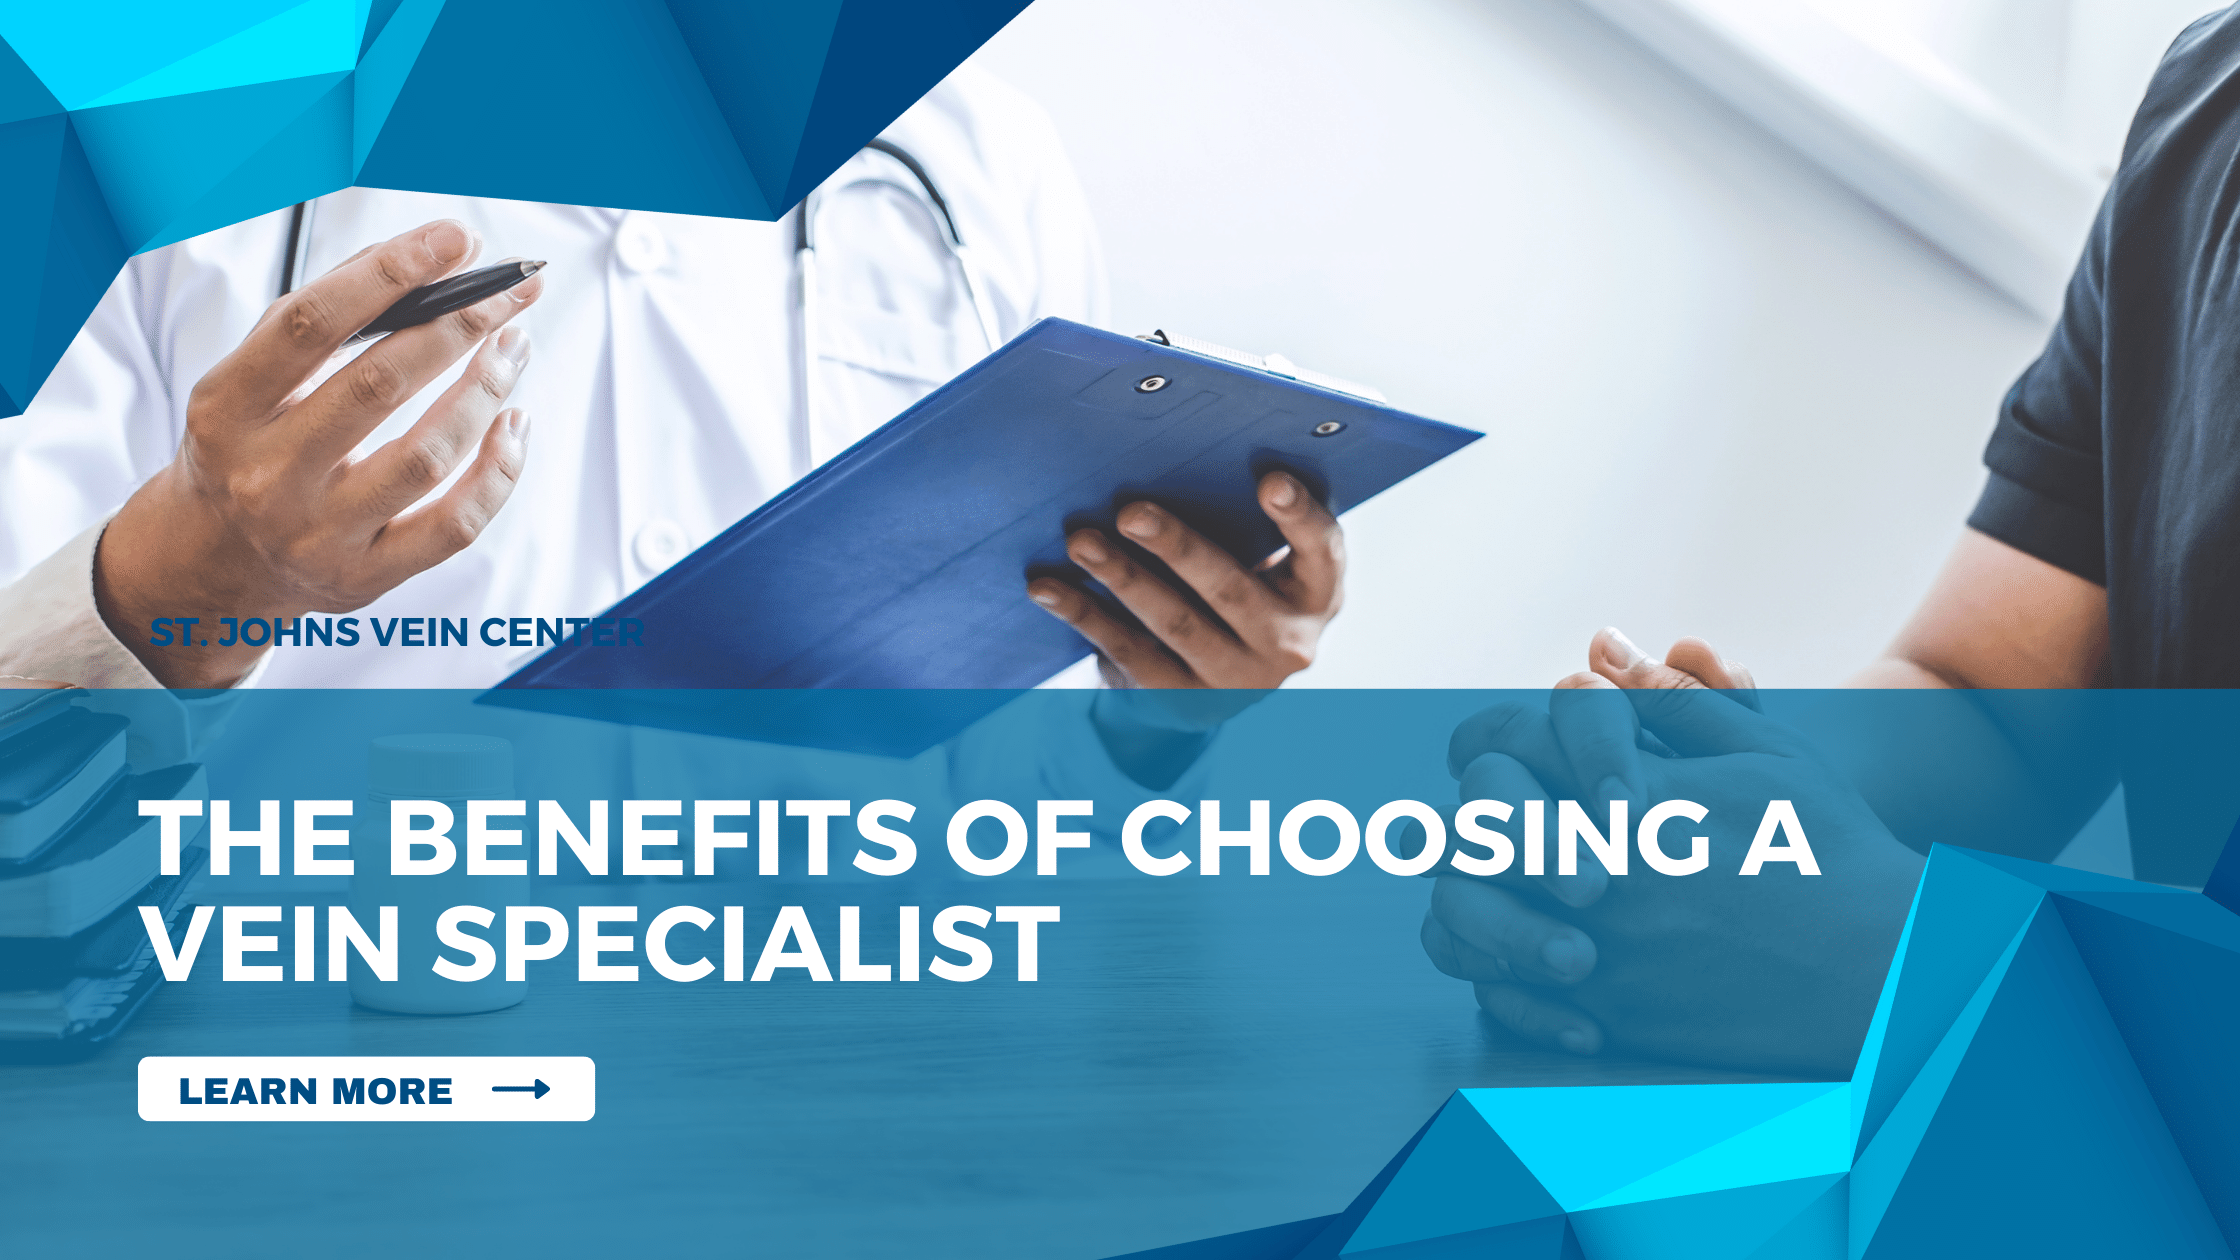 The Benefits OF Choosing a Vein Specialist